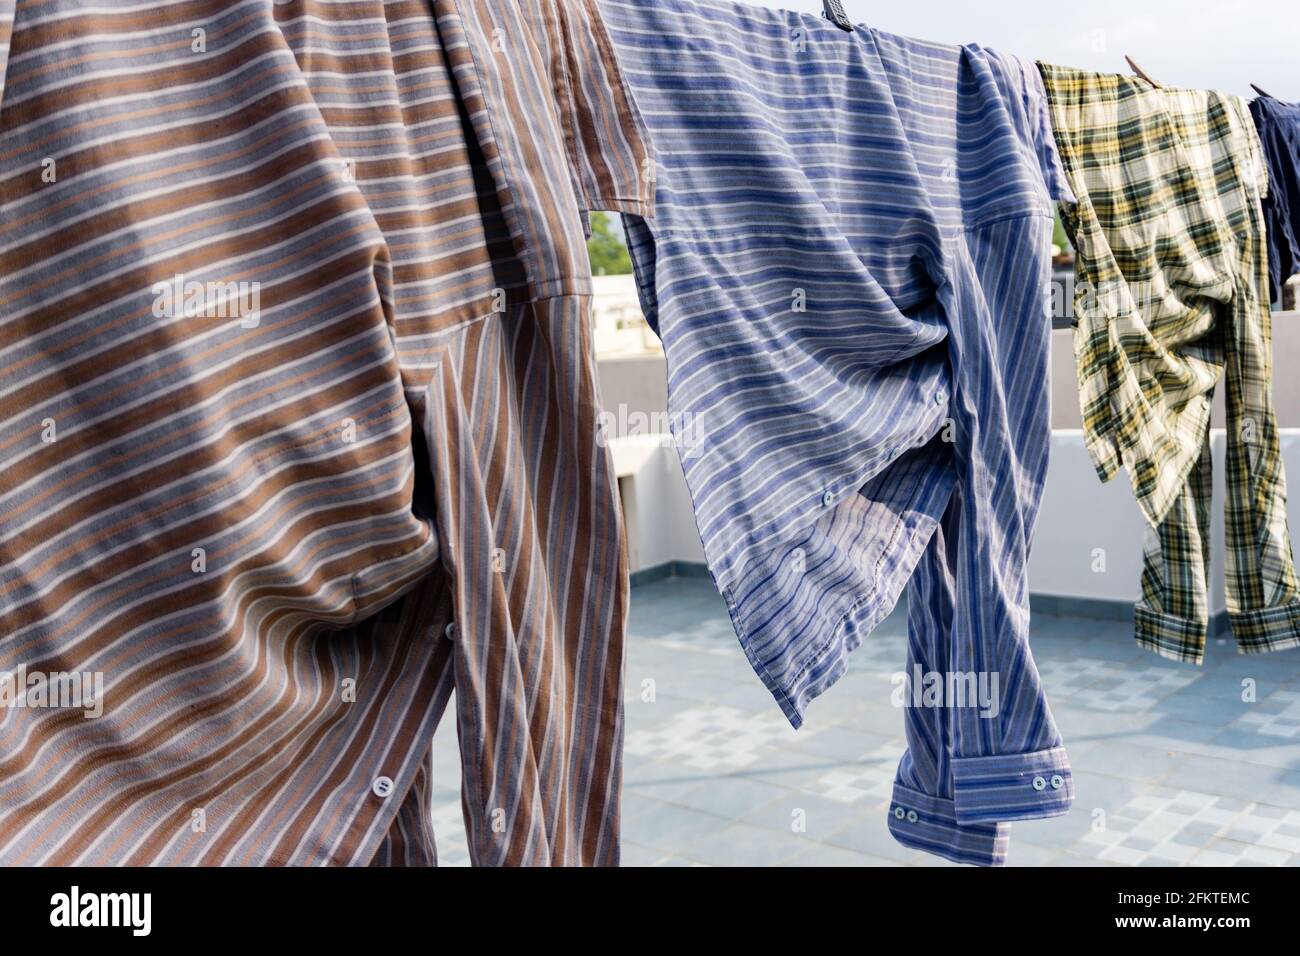 https://c8.alamy.com/comp/2FKTEMC/a-close-up-shot-of-laundry-drying-outside-under-sun-shirts-hanging-on-a-wire-at-roof-2FKTEMC.jpg